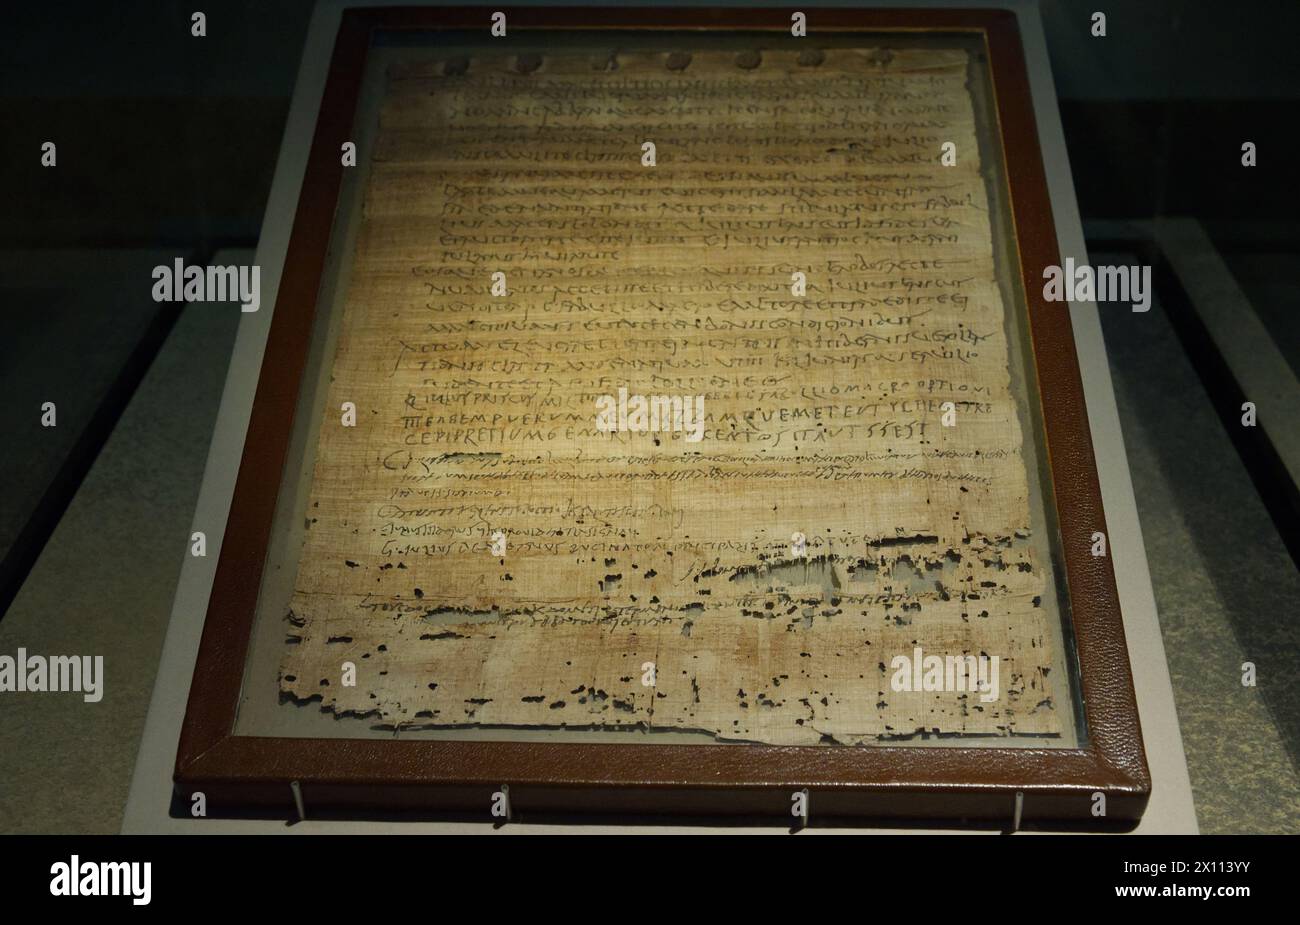 Slave sales contract, Papyrus, Faiyum, Egypt, AD 166 Stock Photo